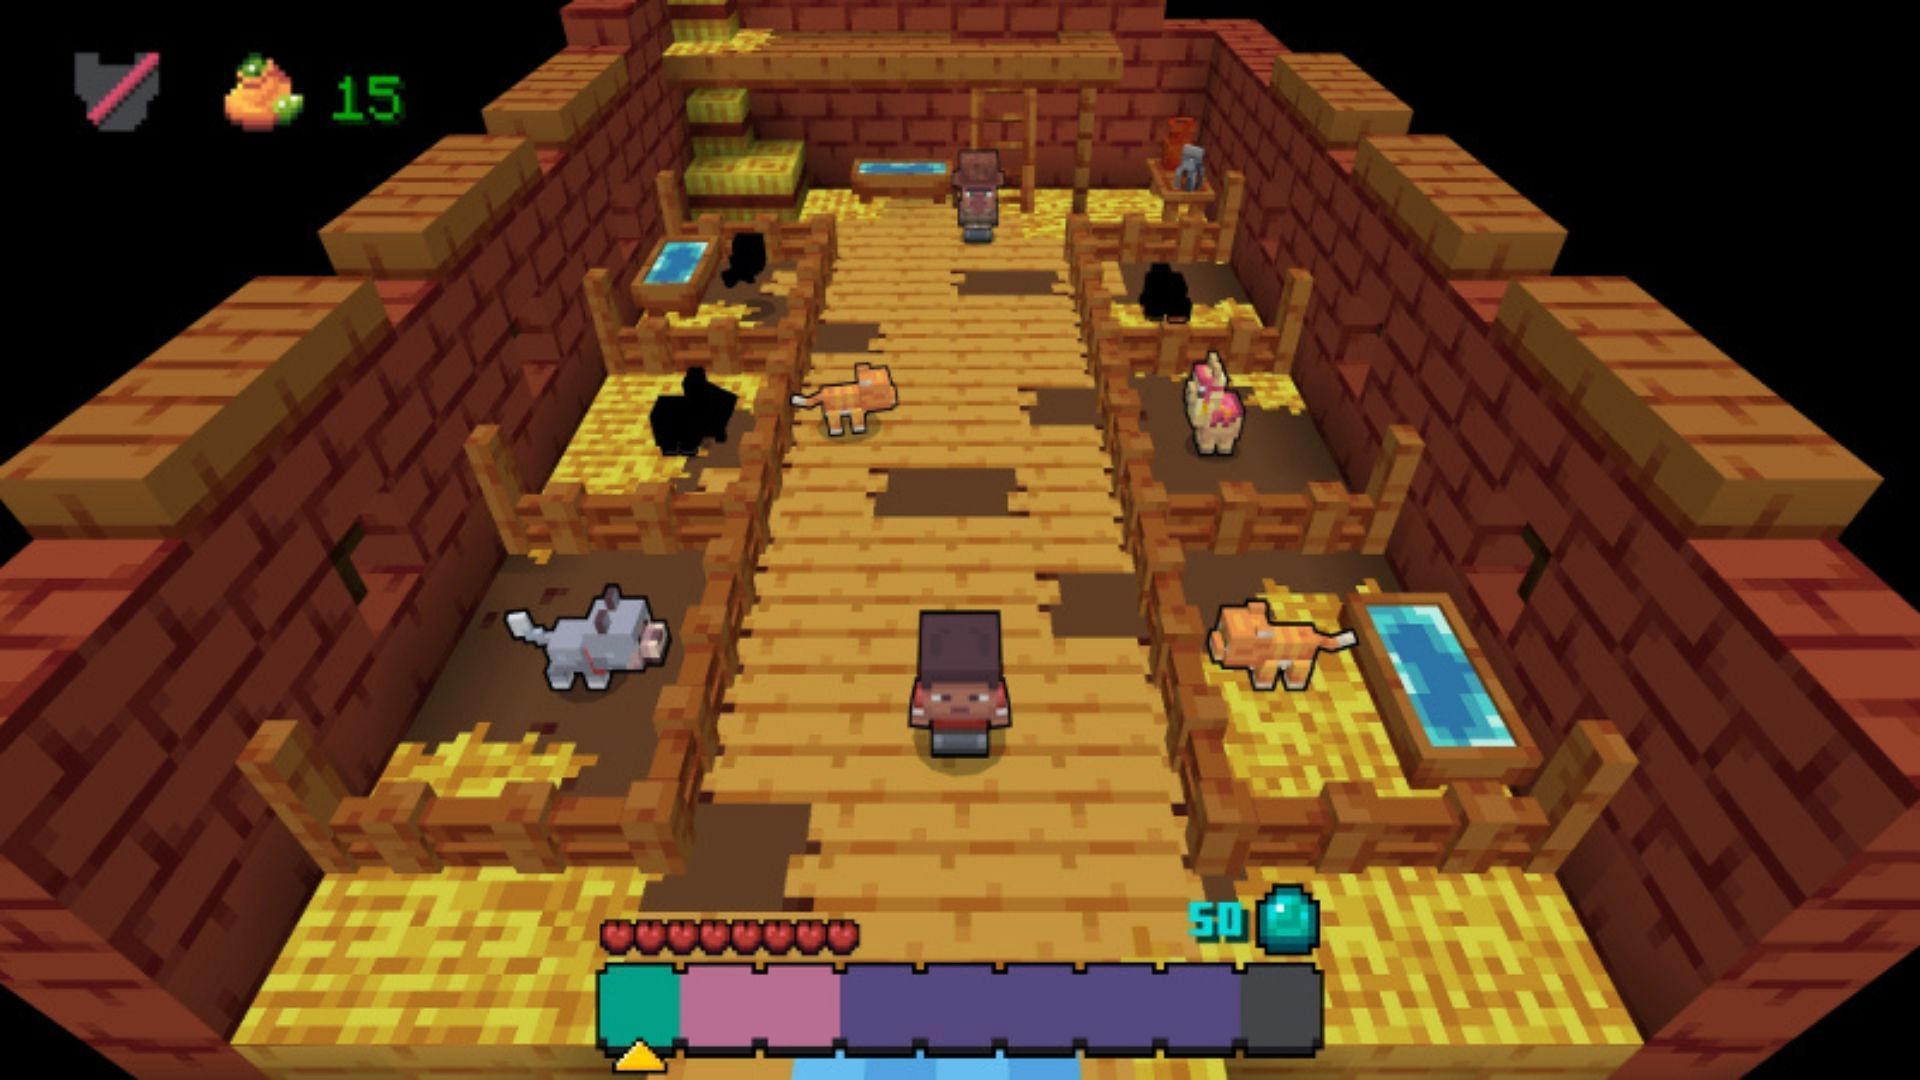 Tinycraft is great for people who like dungeon crawler games (Image via Octovon)